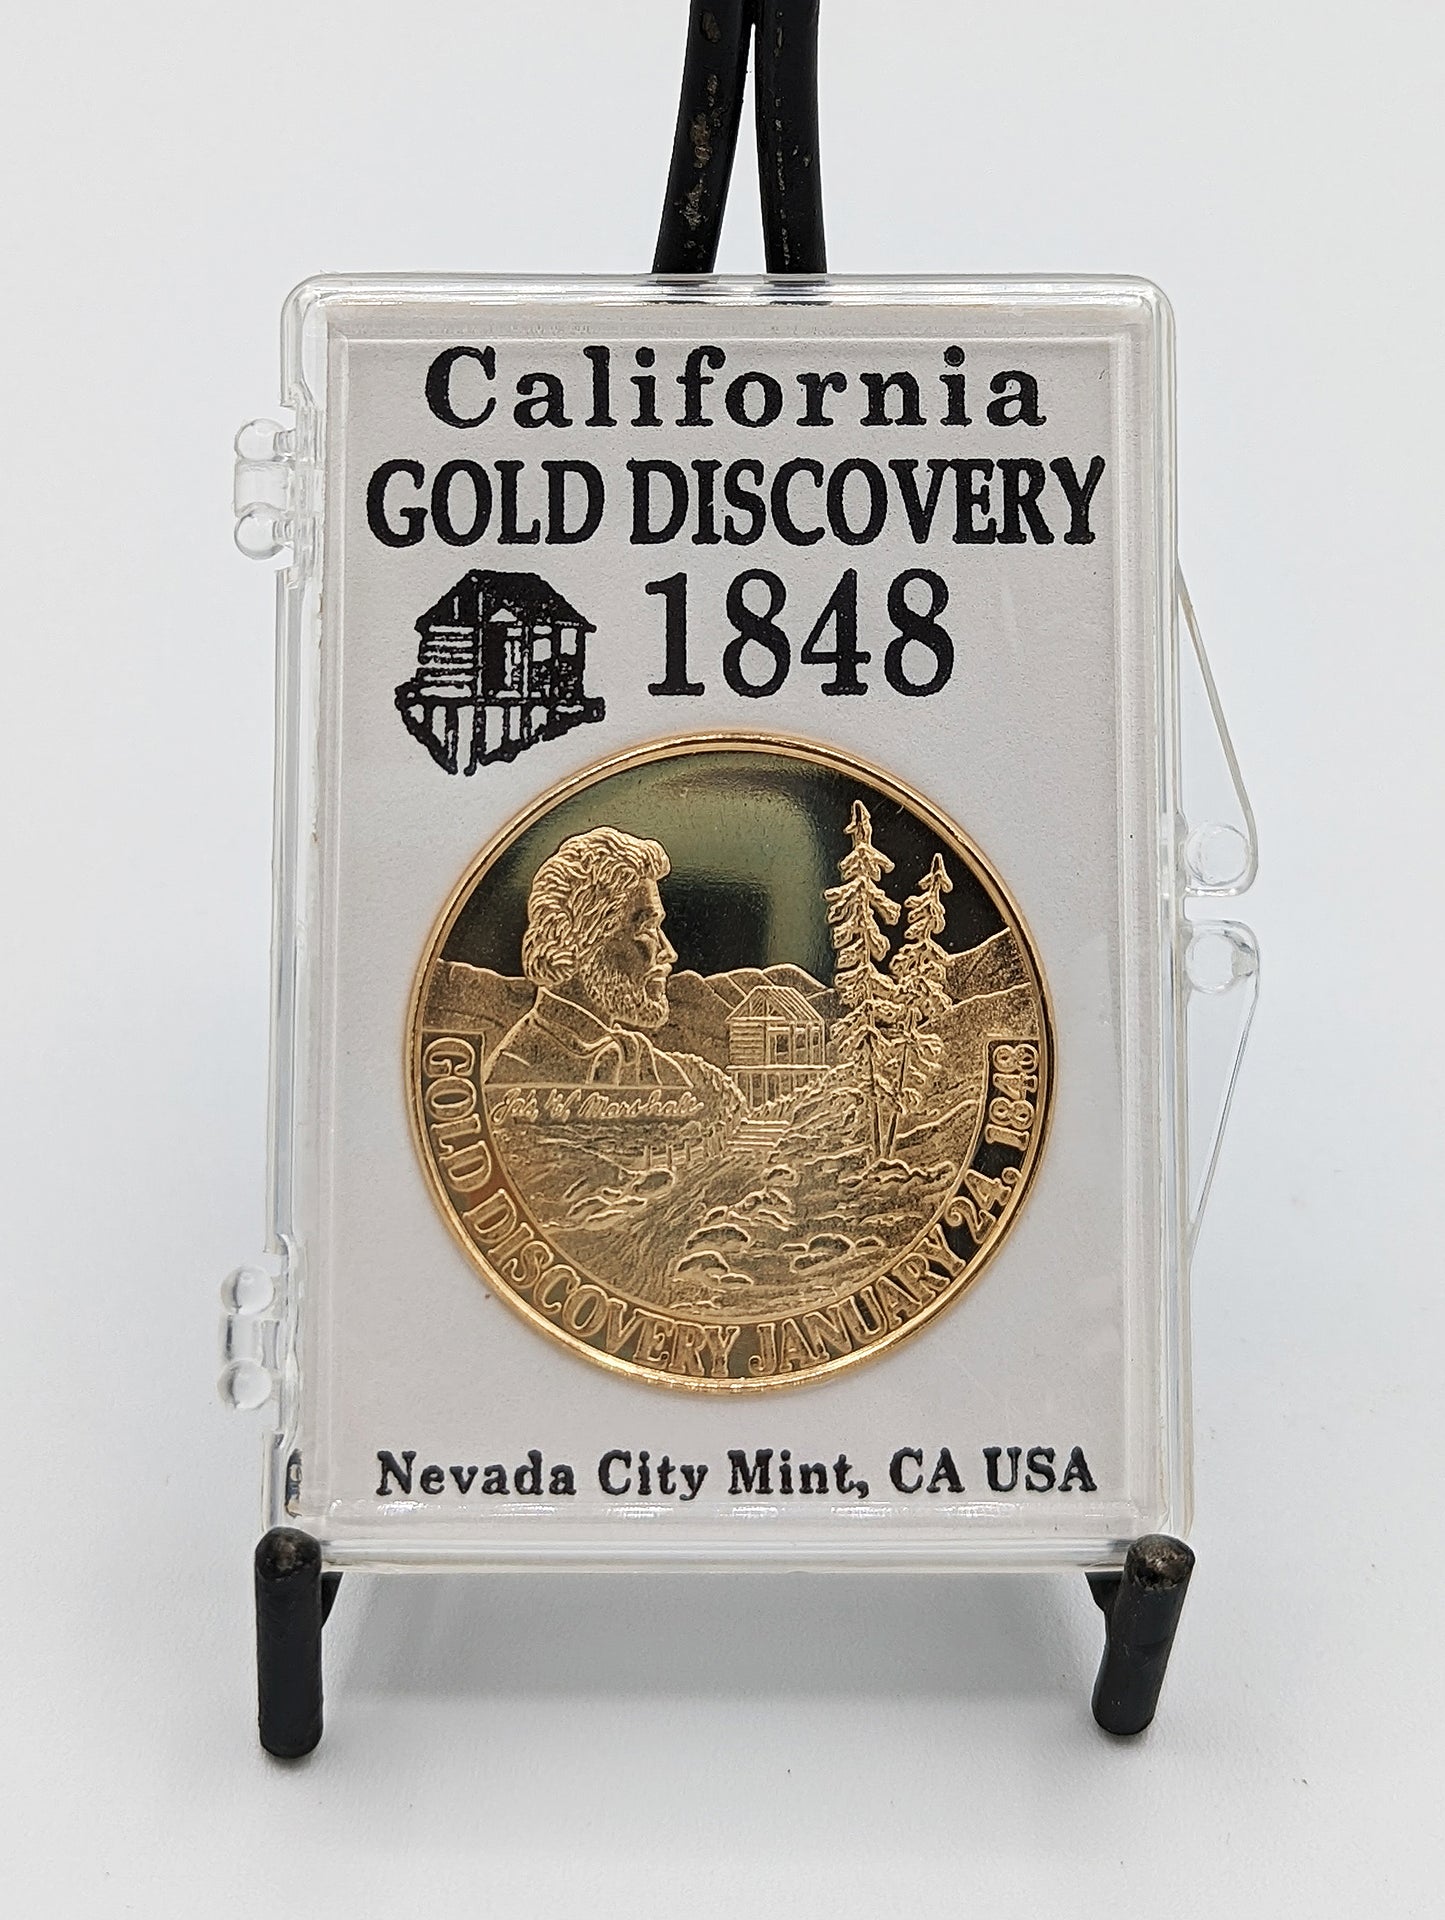 Gold Discovery Commemorative Coin